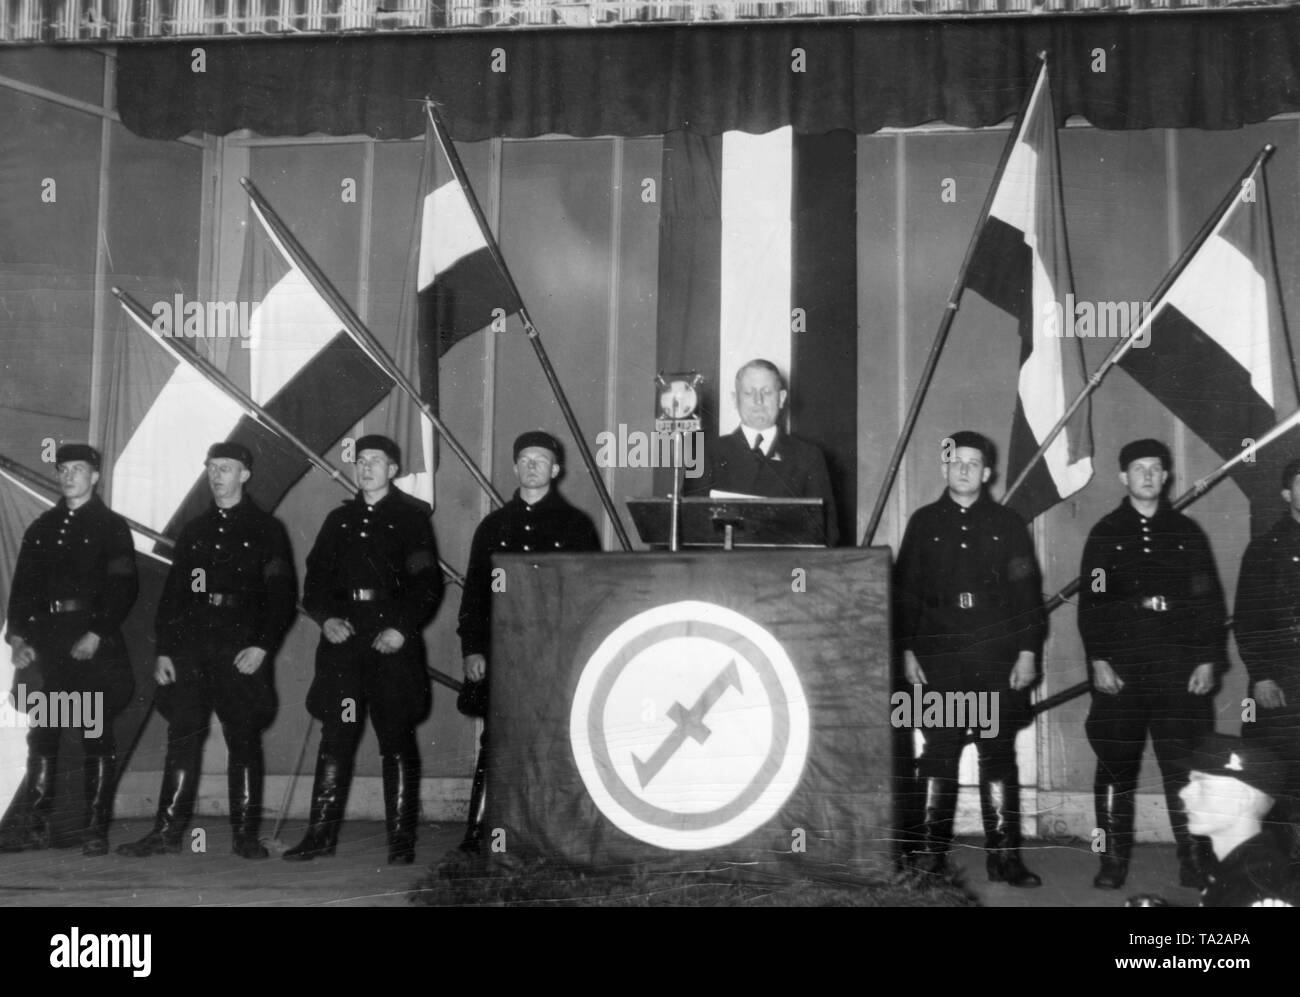 Dr. Ernst Neumann, chairman of the Memeldeutsche Kulturverband (symbol: Wolfsangel), gave a speech in the city of Memel (Klaipeda) to Memel German election workers on the state elections in the Memel area that will take place on 11 December 1938. Next to the lectern: Memeldeutscher Ordnungsdienst (Memel German Security Service) (SS). In the background, several Reich's flag. Stock Photo